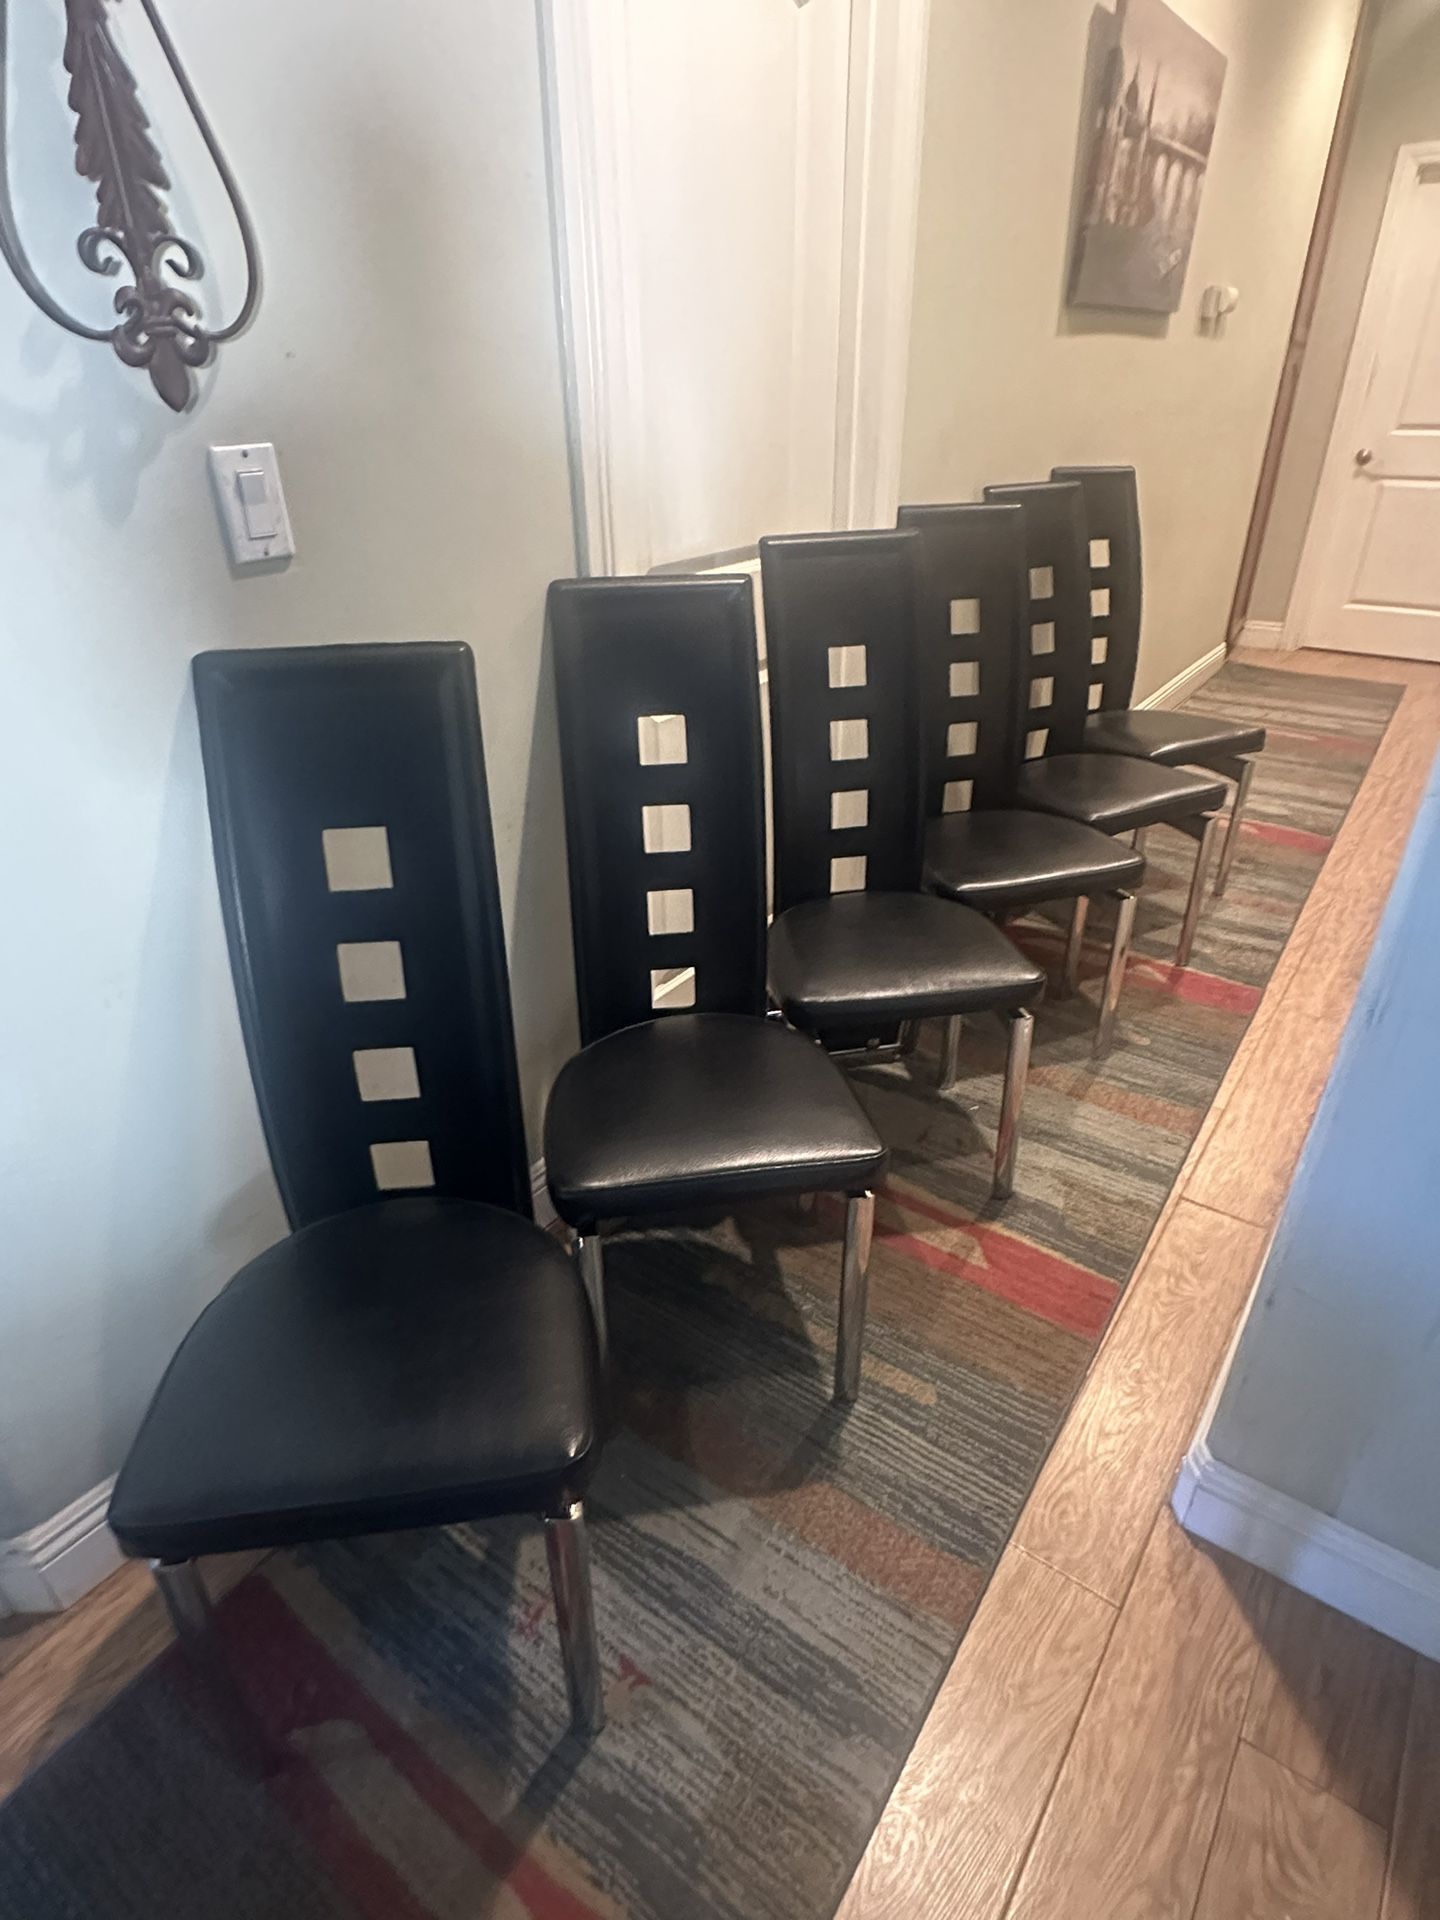  Dining Room Chairs with 6 Hole Leather Chair